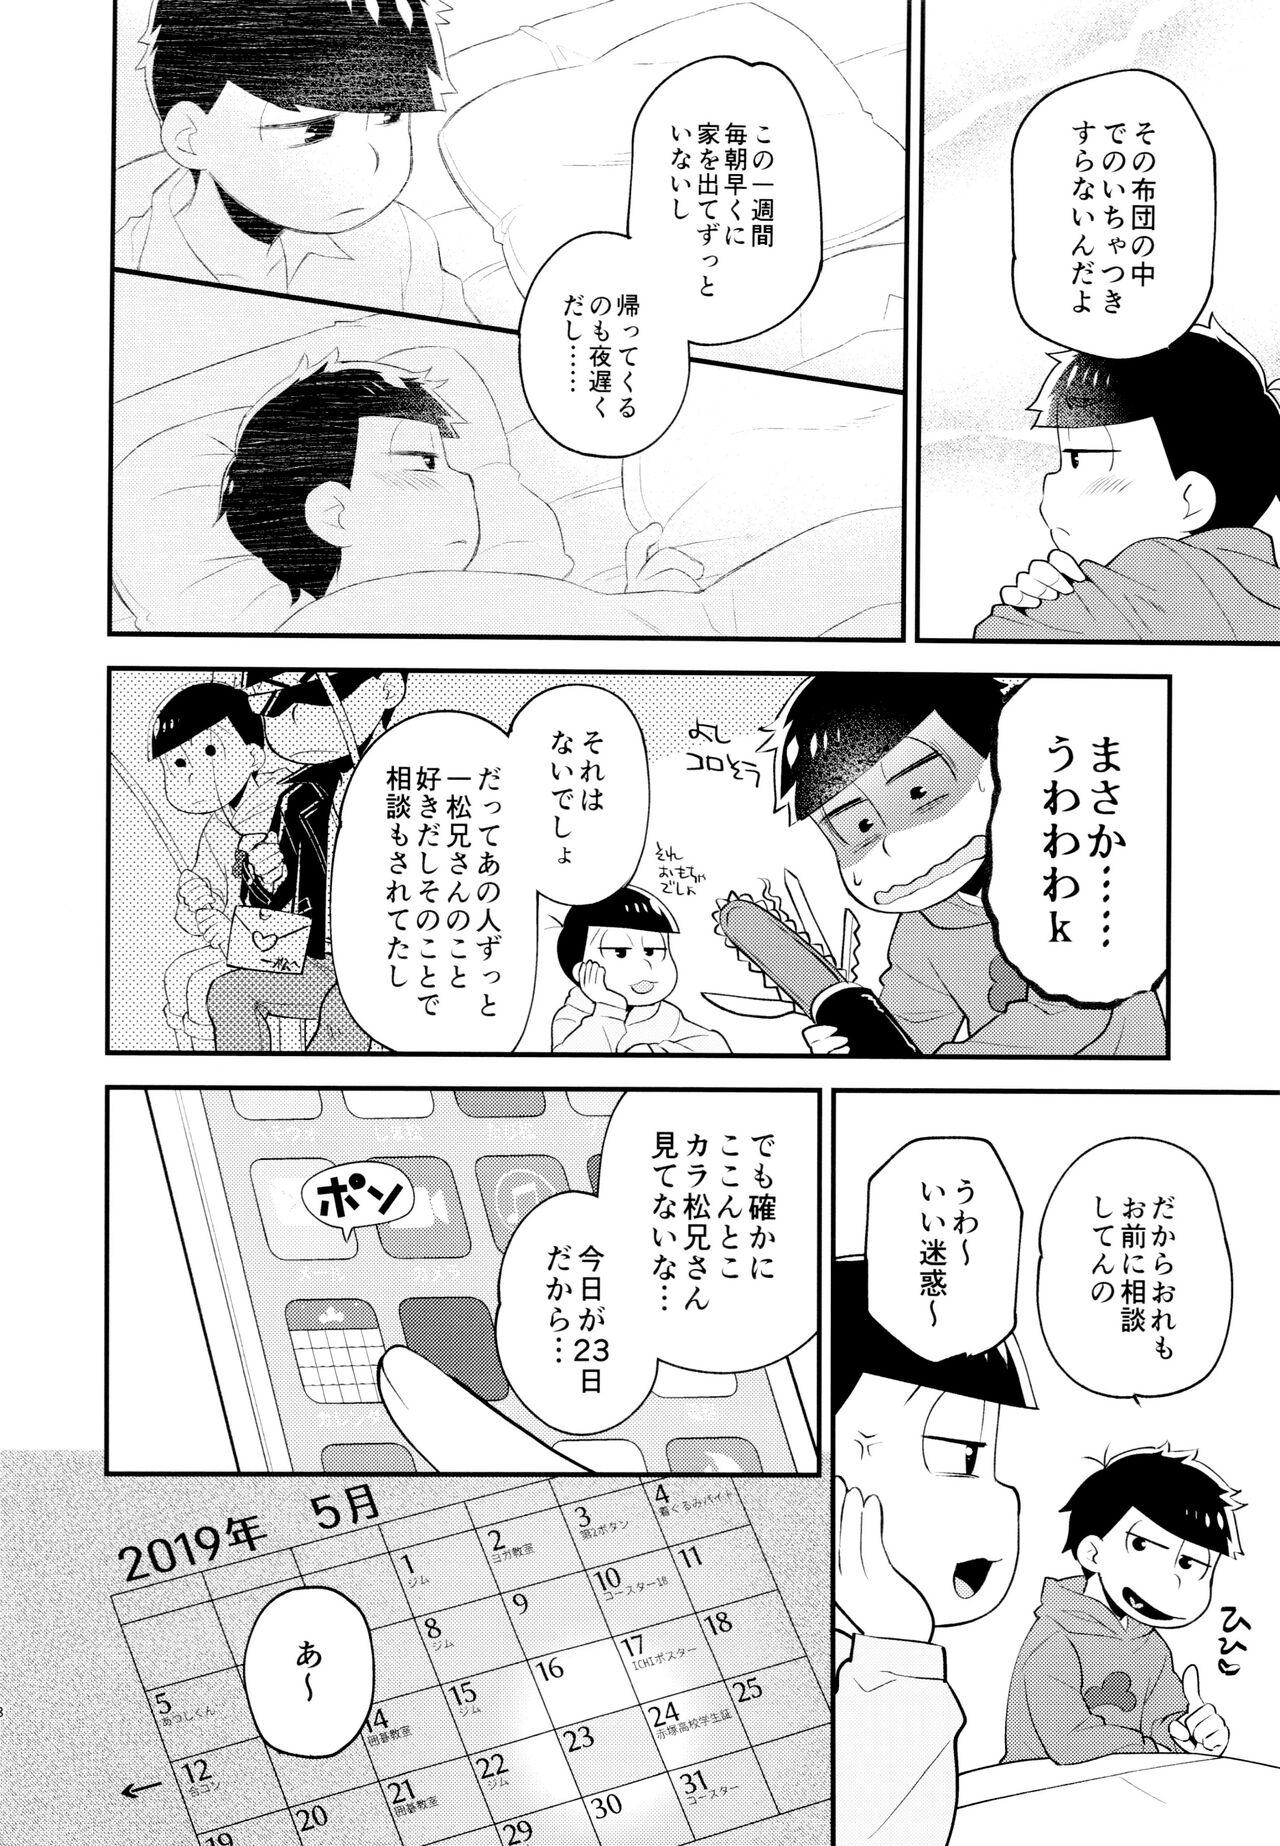 Chica Our Six-Day Sexual War - Osomatsu-san Hoe - Page 7